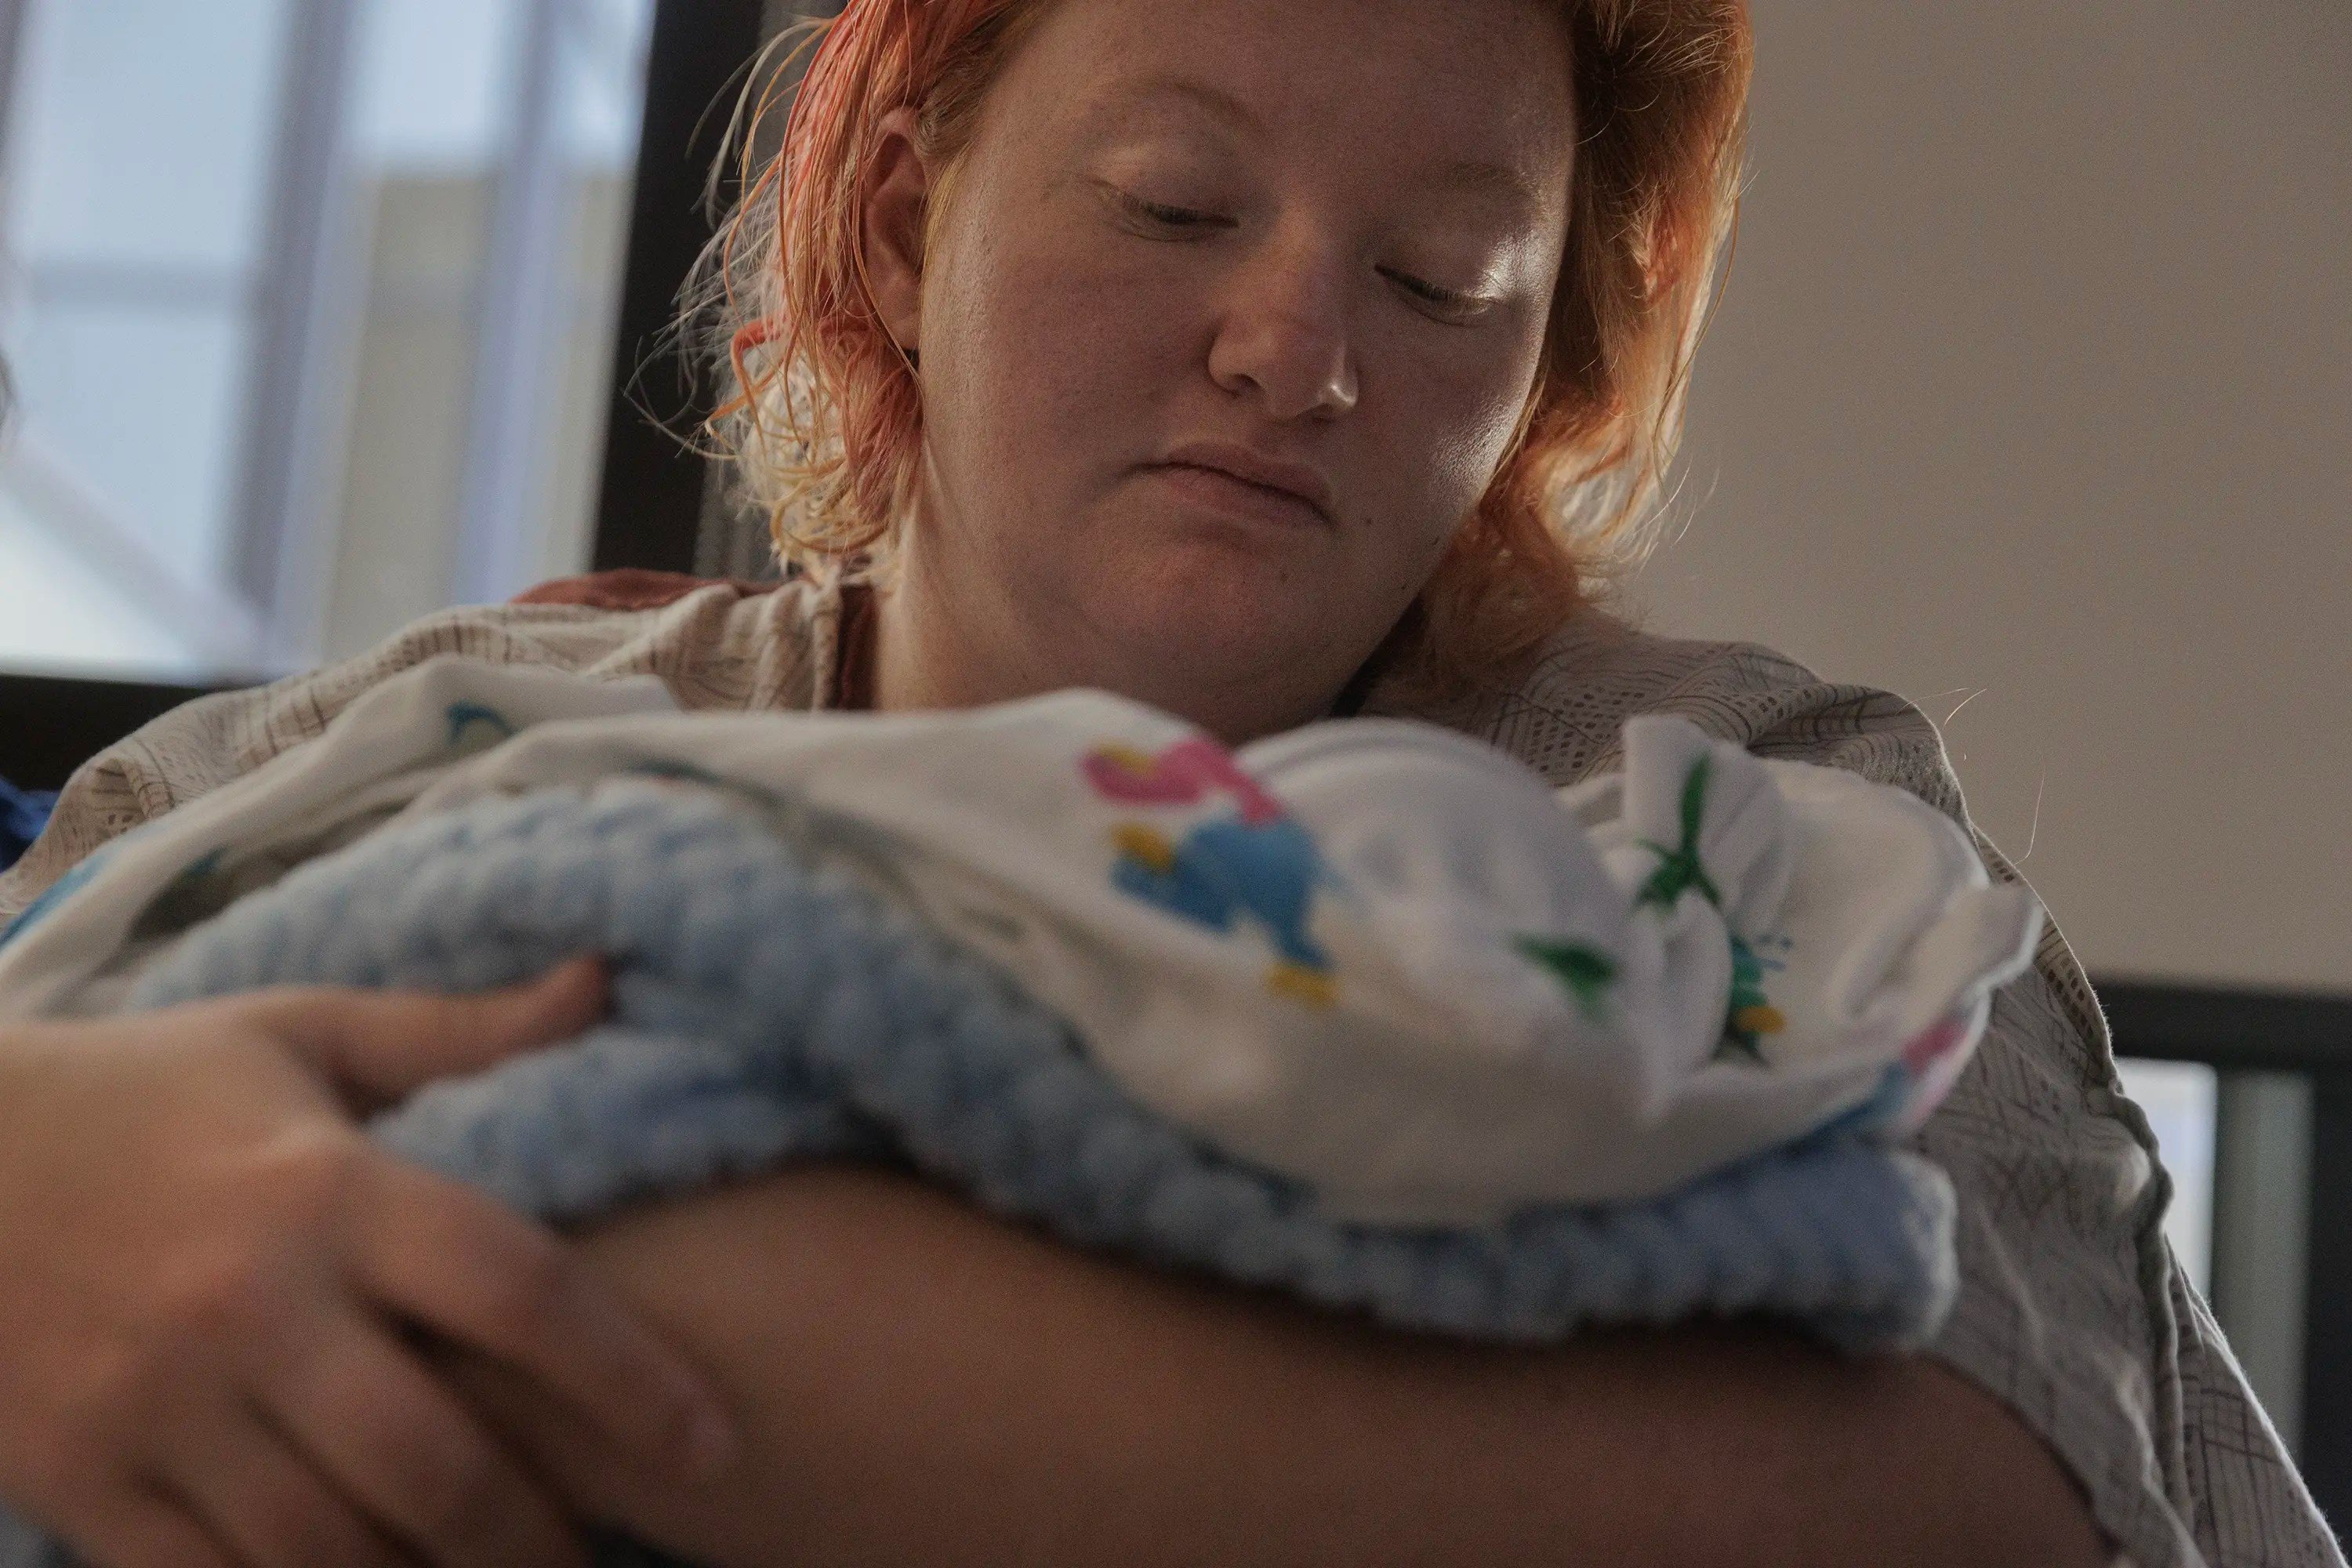 She was told her twin sons wouldn't survive. Texas law made her give birth  anyway.